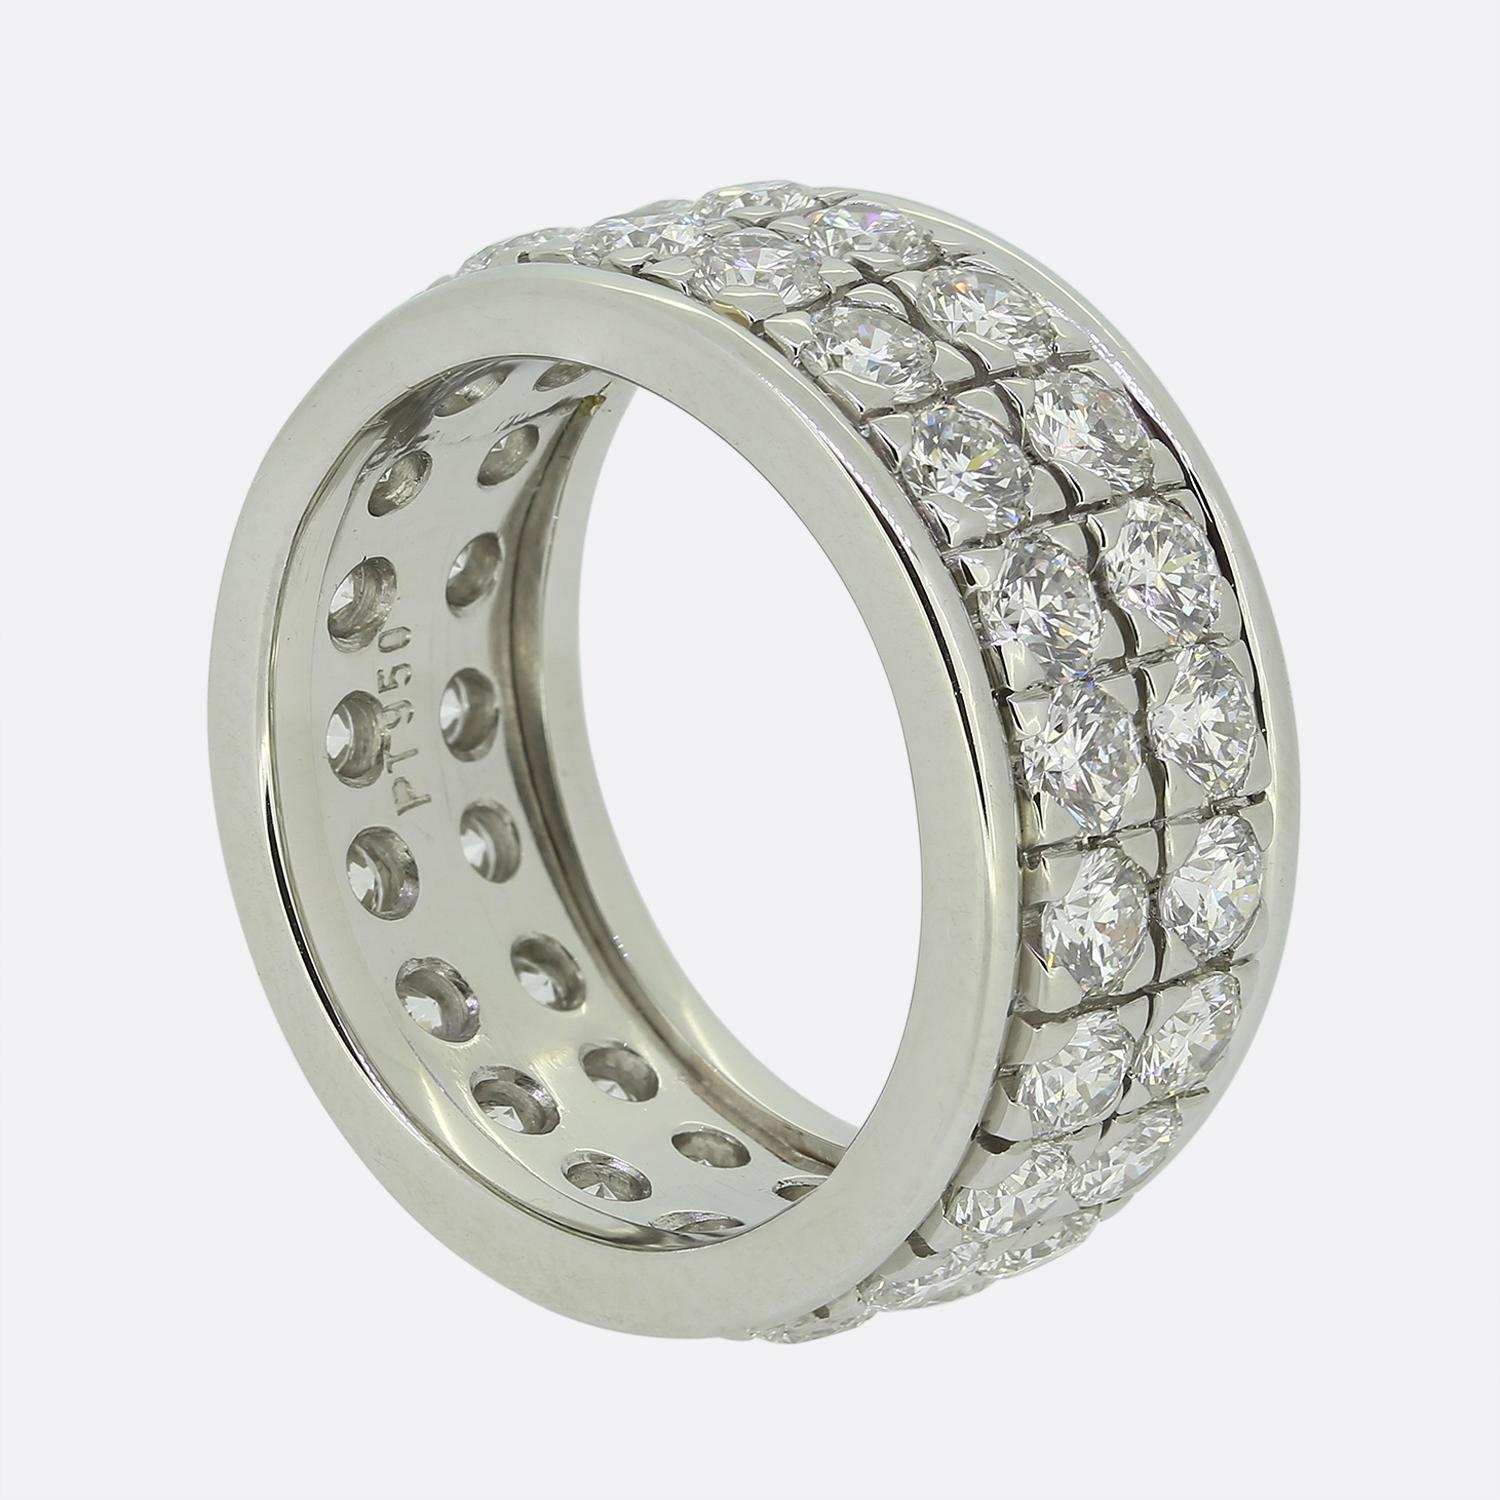 Here we have a marvellous diamond eternity ring. Crafted from platinum, this piece showcases two rows of individually claw set round brilliant cut diamonds amidst a polished channelled setting above and below which wraps around the entire finger.